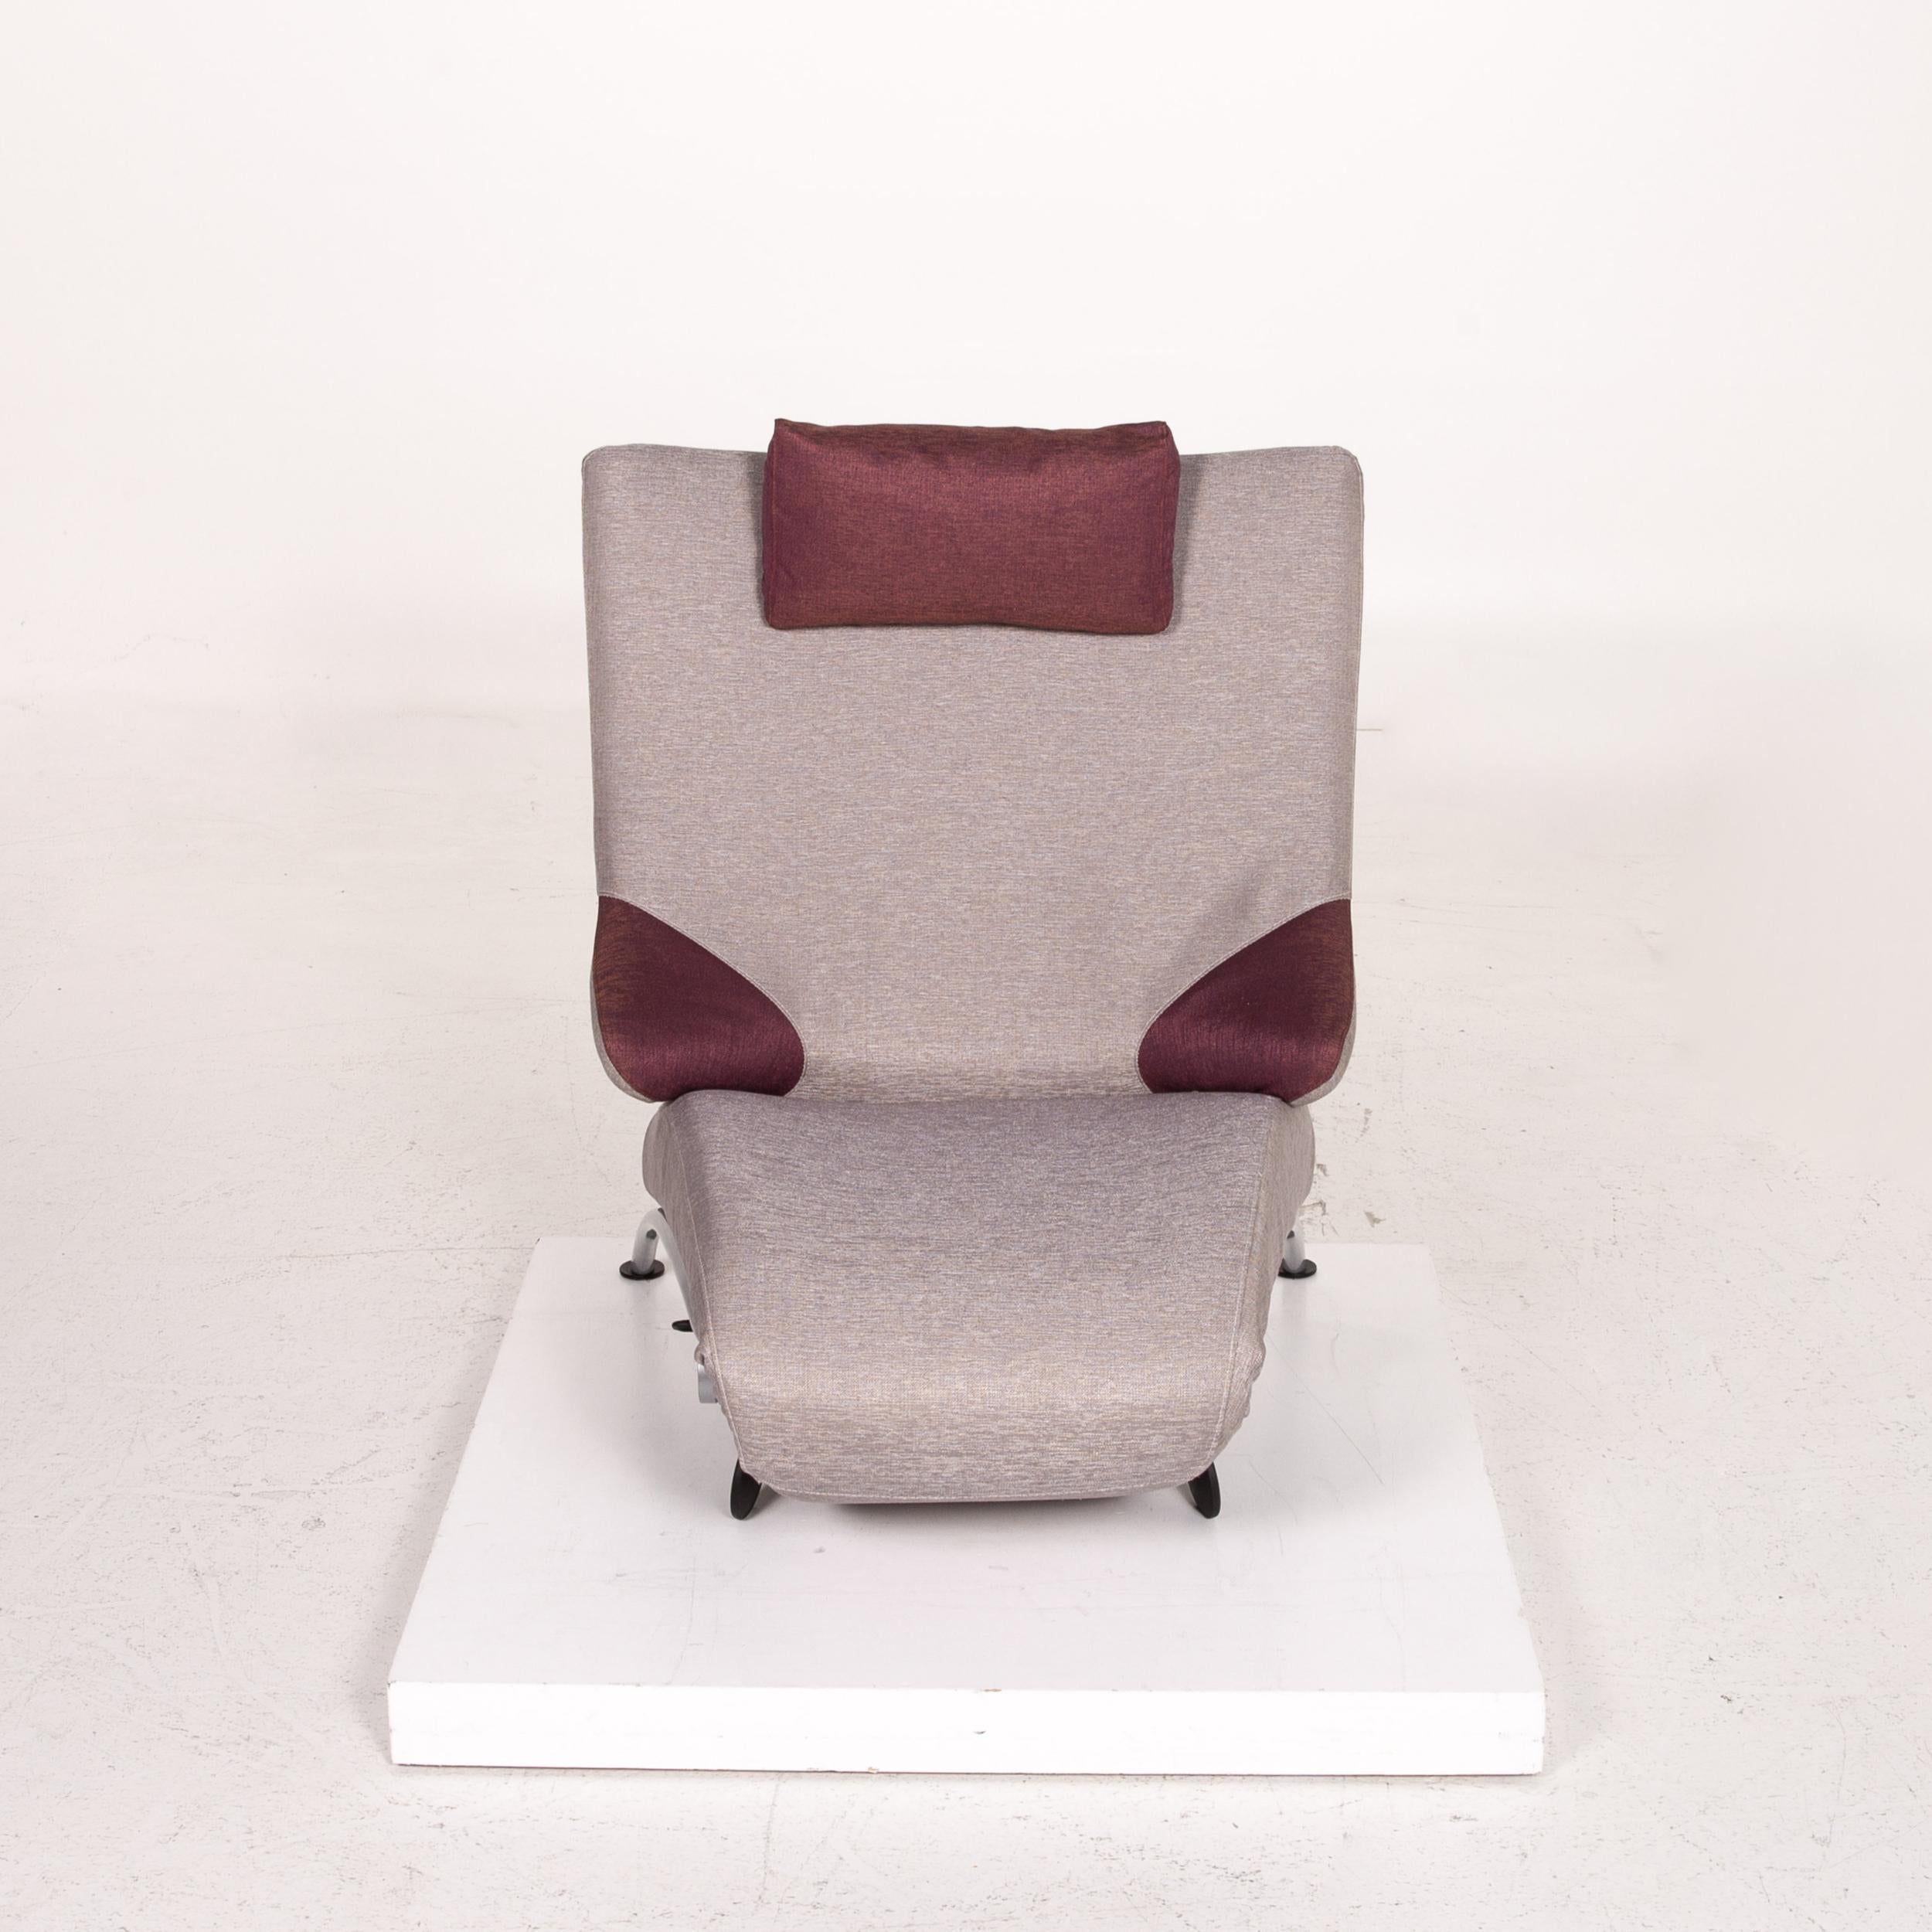 WK Wohnen Solo 699 Fabric Lounger Gray Purple Relax Lounger Armchair Relax 2